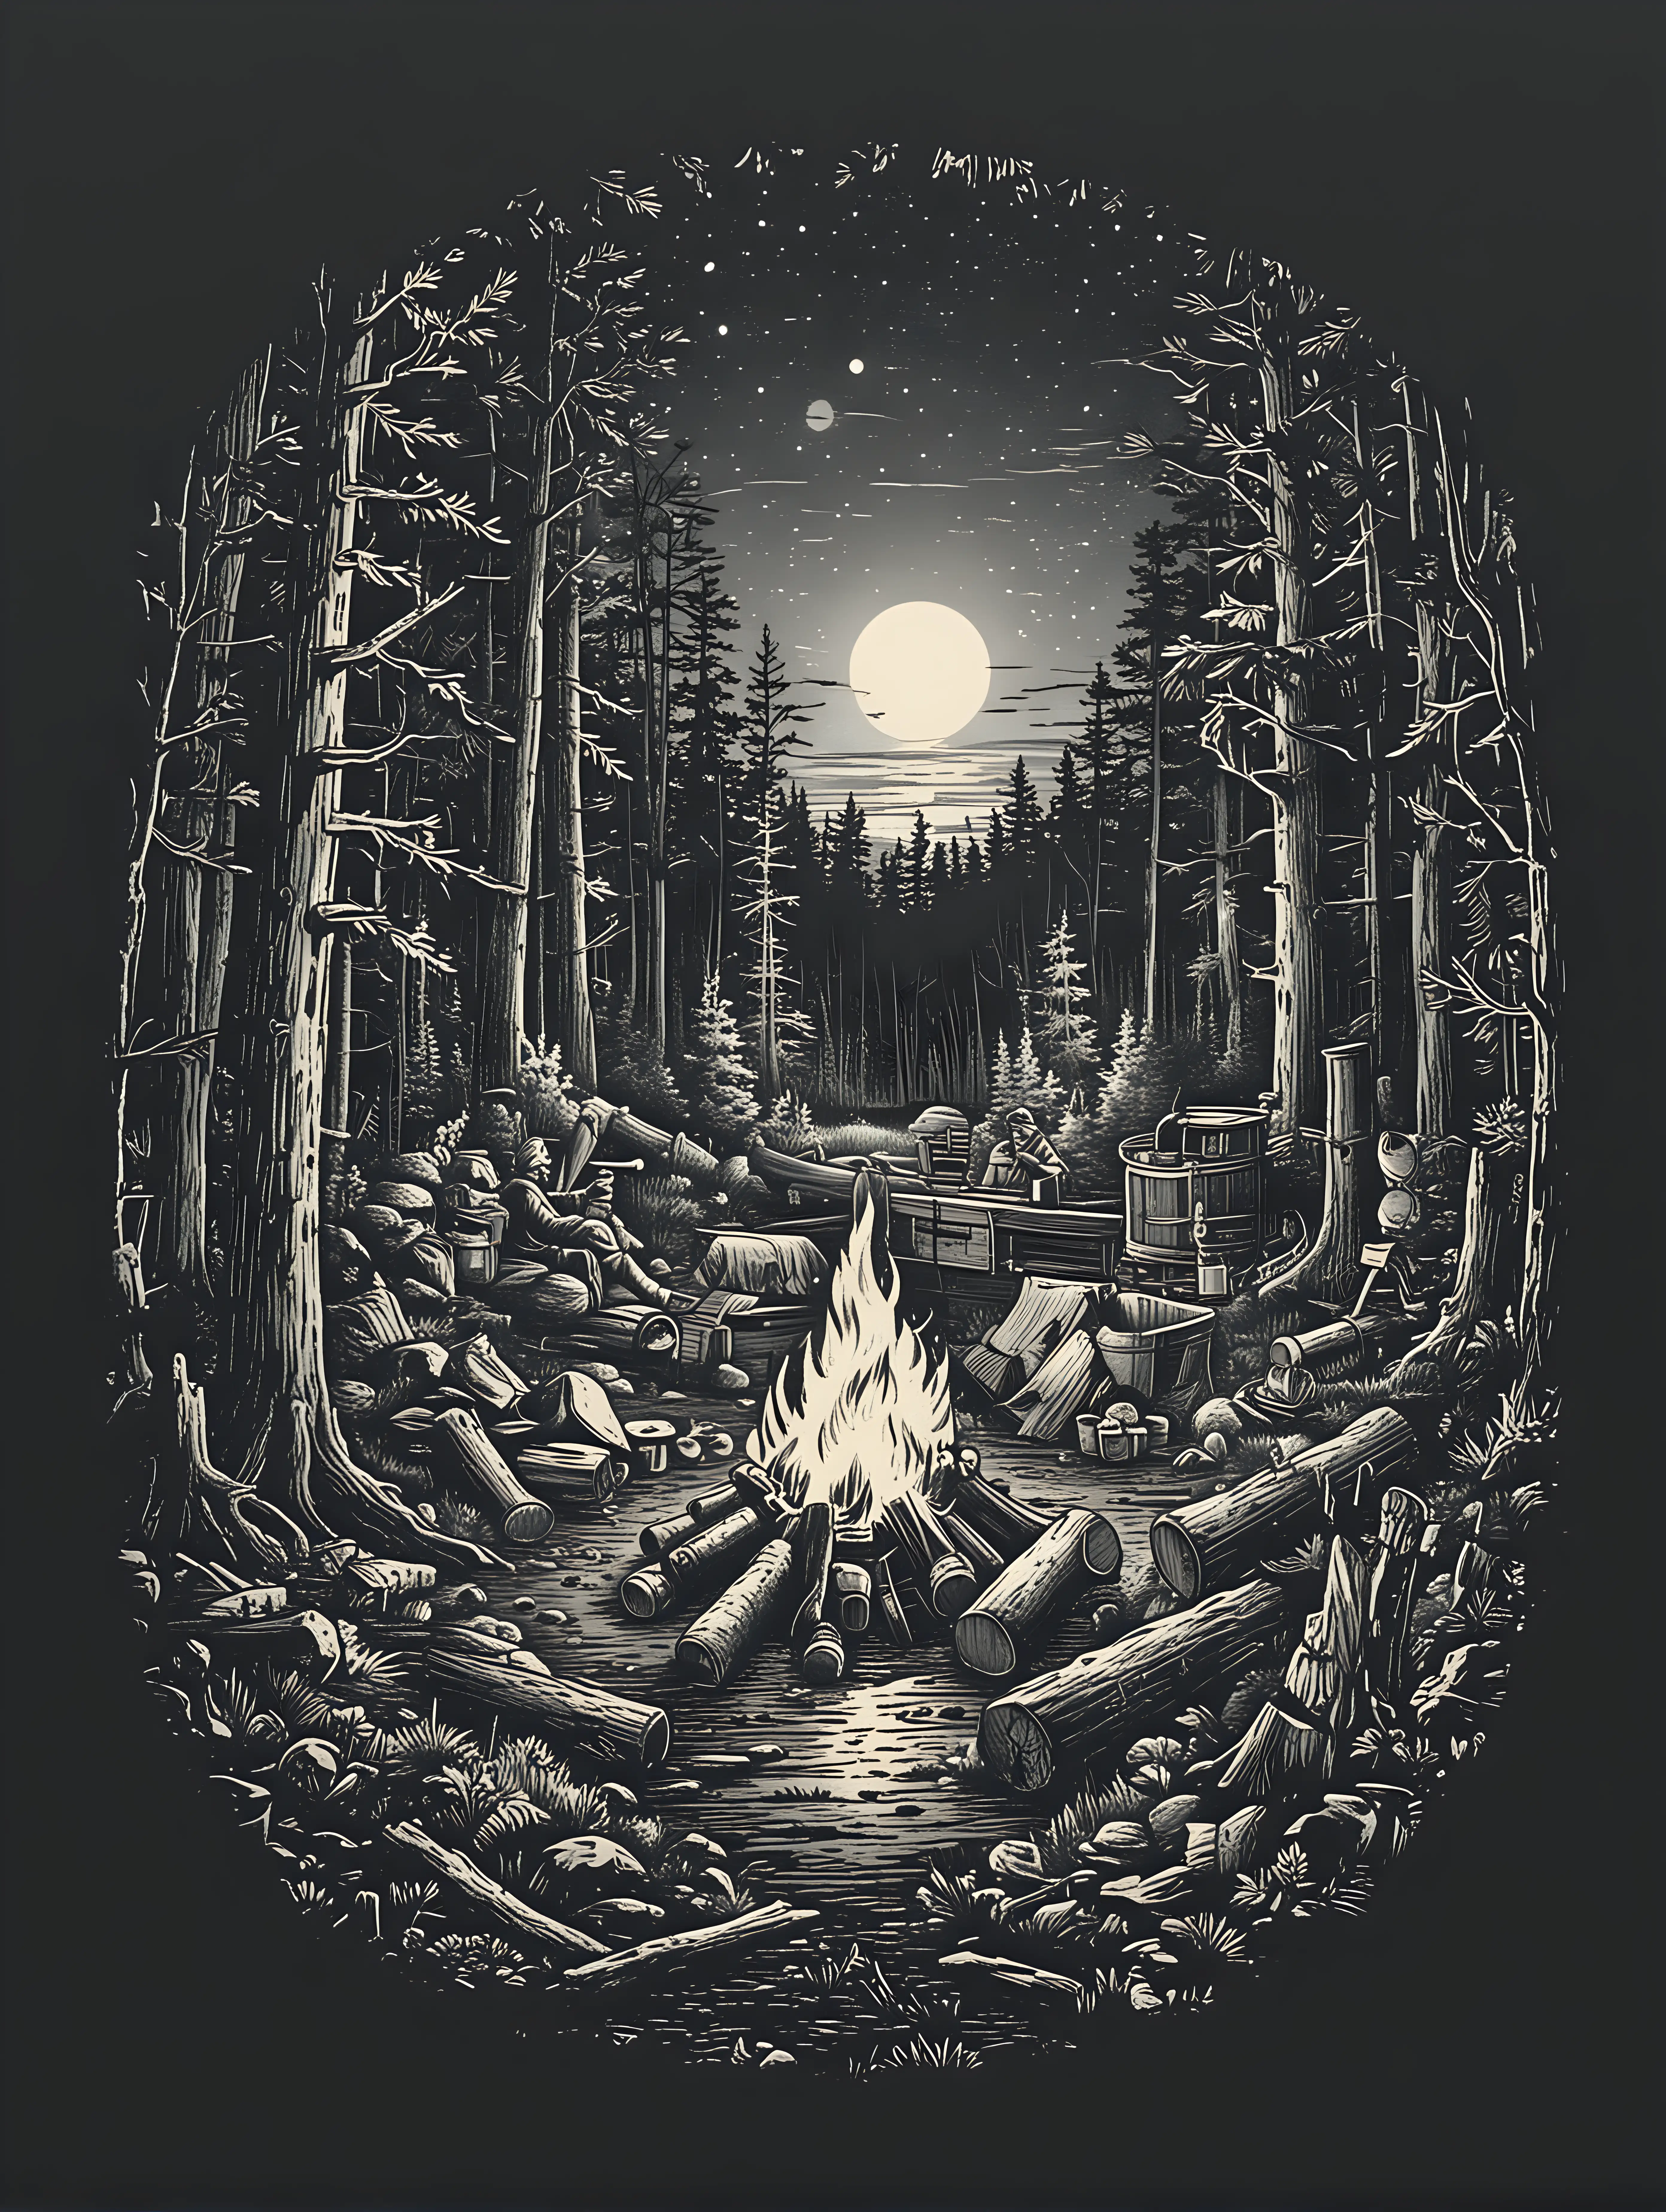  spot color shirt design, illustrating a lively campfire in the foreground with a hidden moonshine operation in the woods. adding a touch of intrigue. use elements such as a moonshining Still